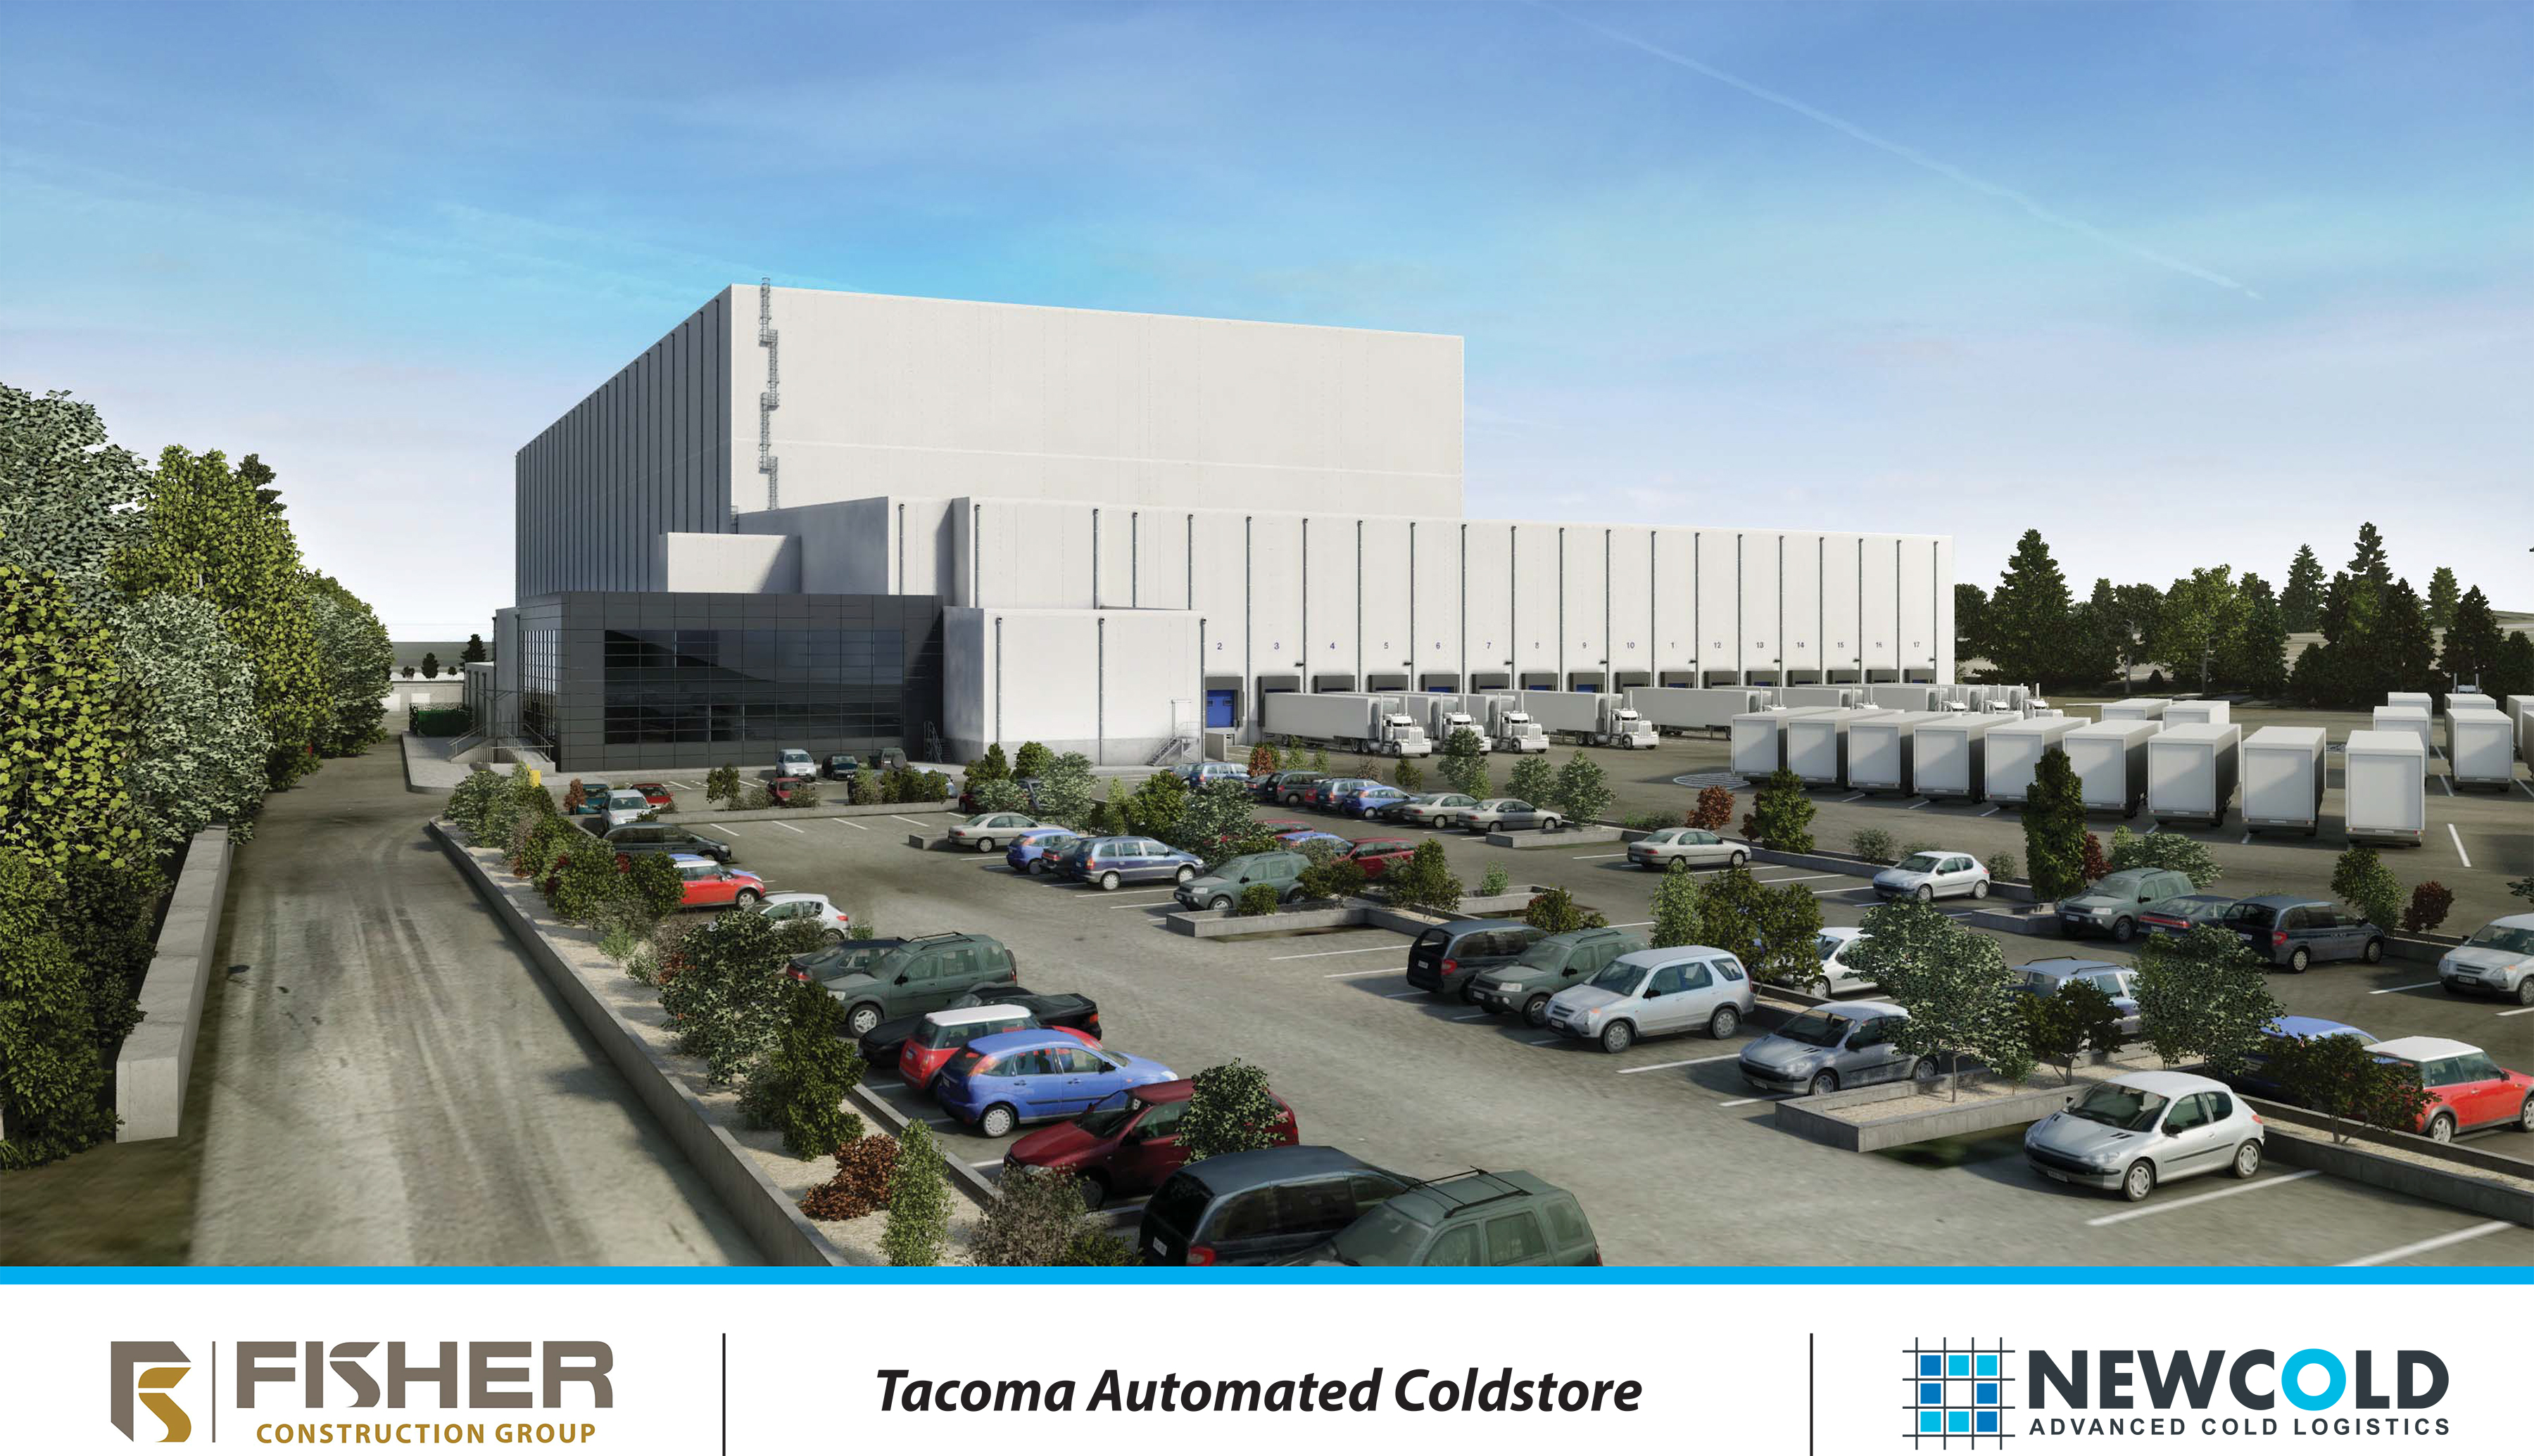 NewCold’s Tacoma Automated Coldstore, located in proximity to the Port of Tacoma and I-5, will store products for multiple customers including Trident Seafoods.